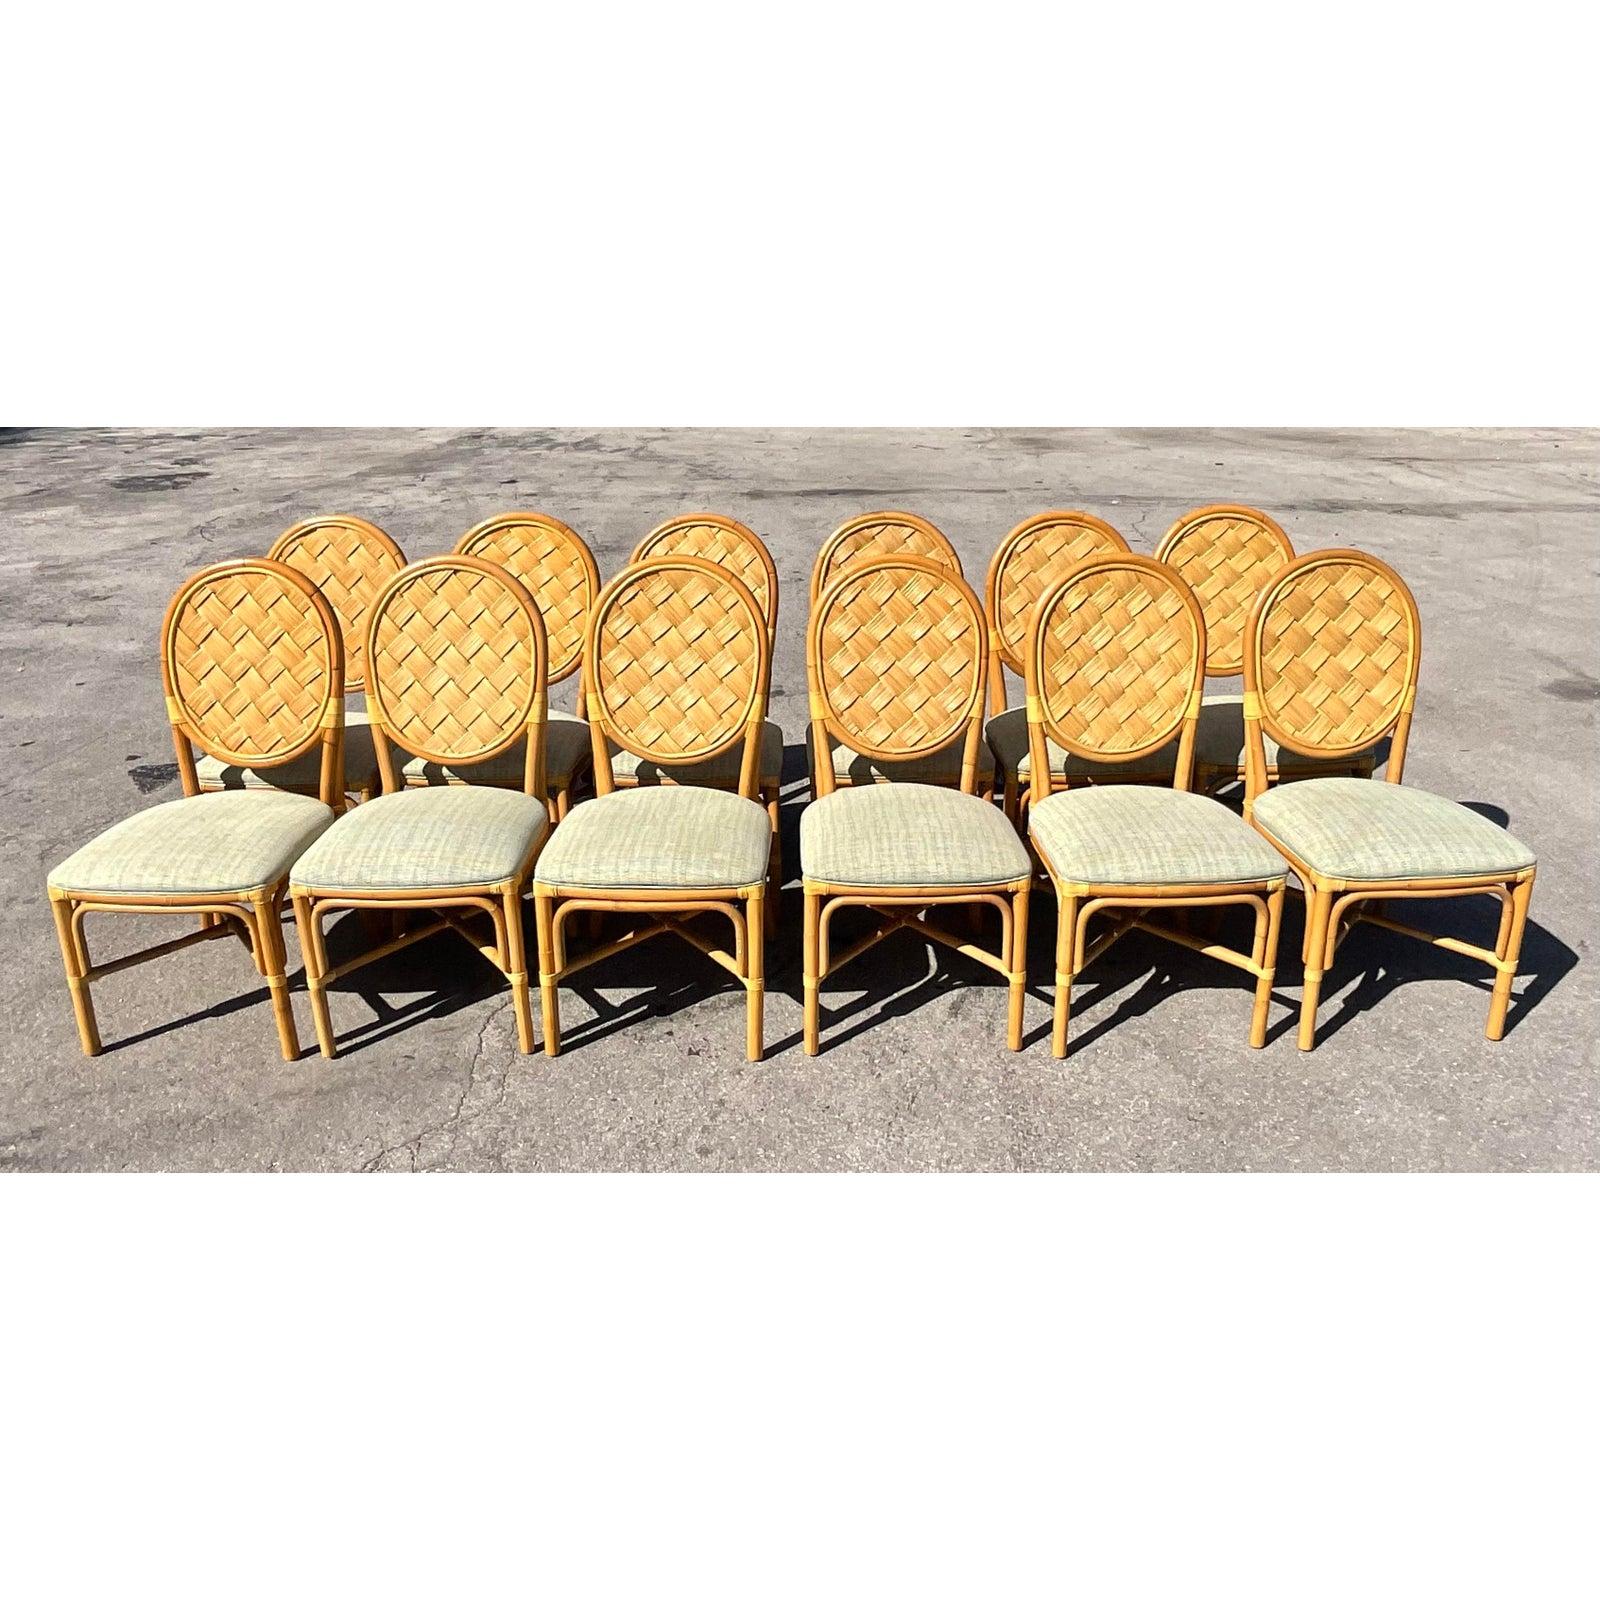 Incredible set of 12 vintage Coastal woven rattan dining chairs. An iconic weave structure done in the manner of John Hutton for Donghia. Made famous by His legendary Block Island collection. Upholstered in a lovely pale blue green printed fabric.